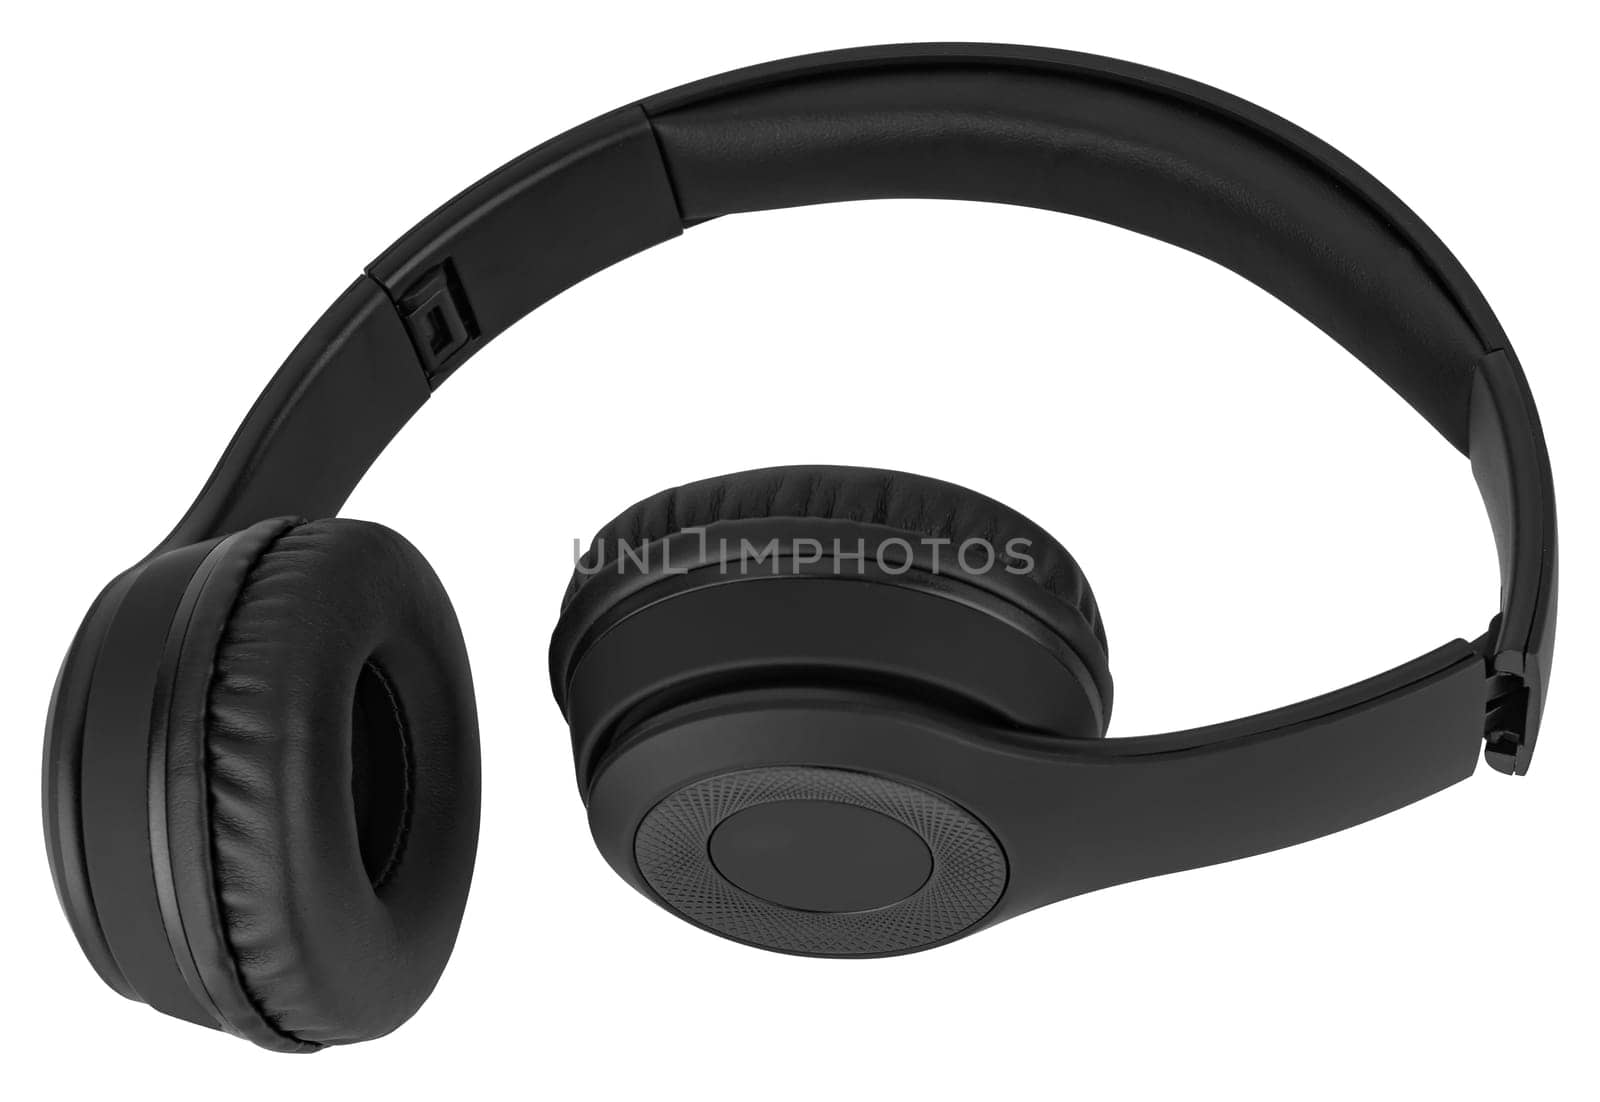 Wired headphones, computer accessory in isolation on a white background